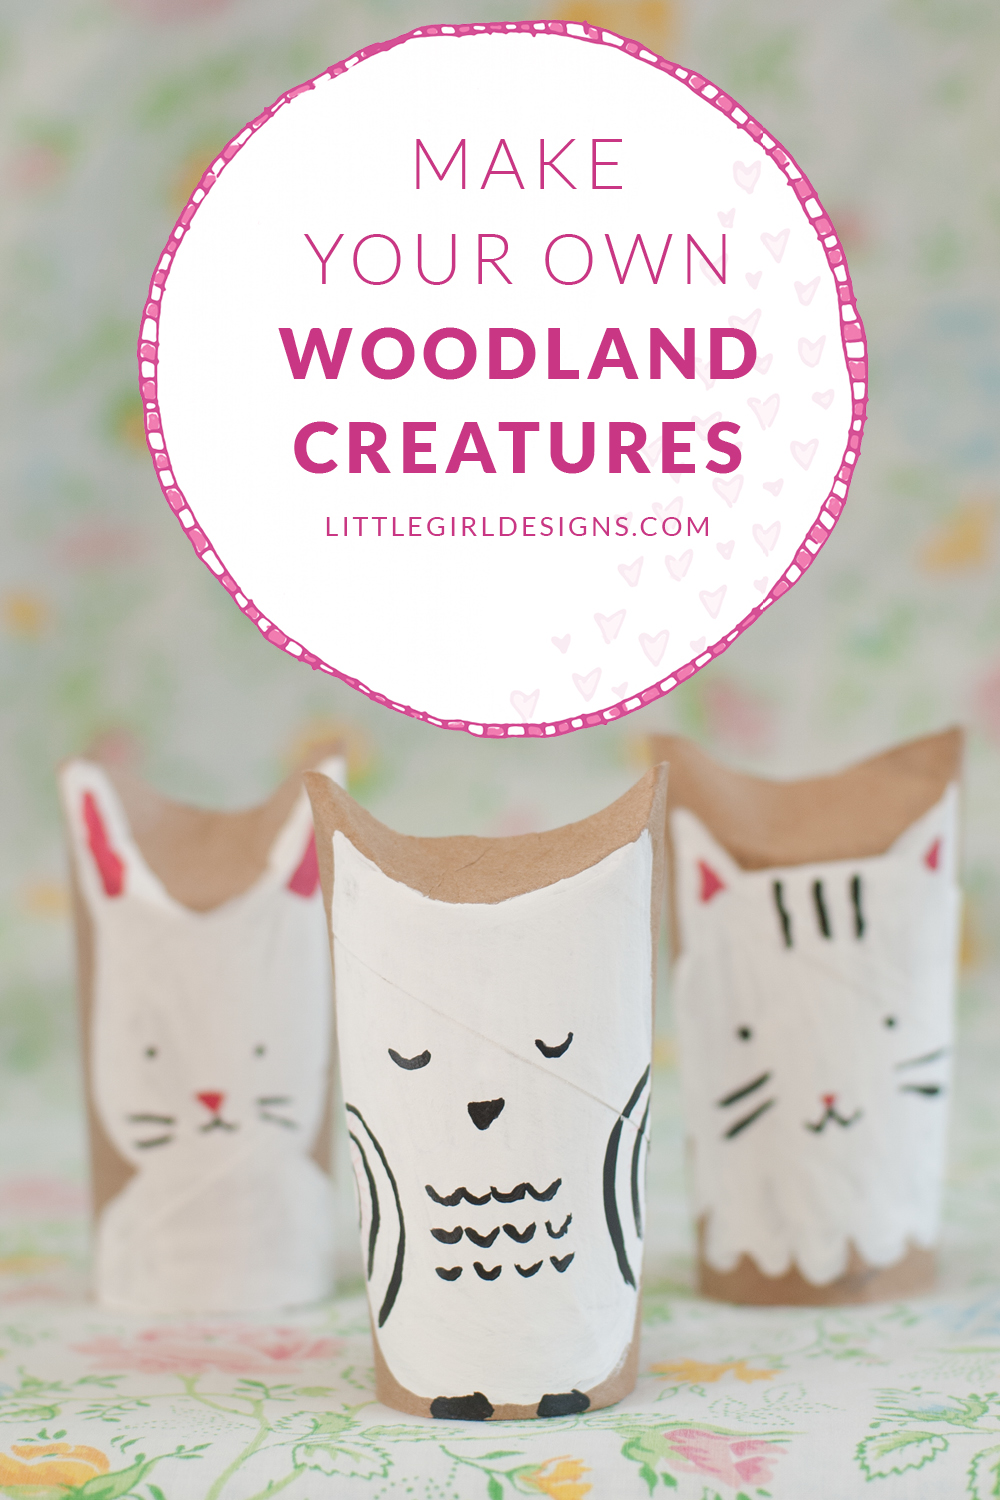 Make your own woodland creatures out of toilet paper rolls! A great craft for kids though adults will have fun making them too (I did :)) @littlegirldesigns.com